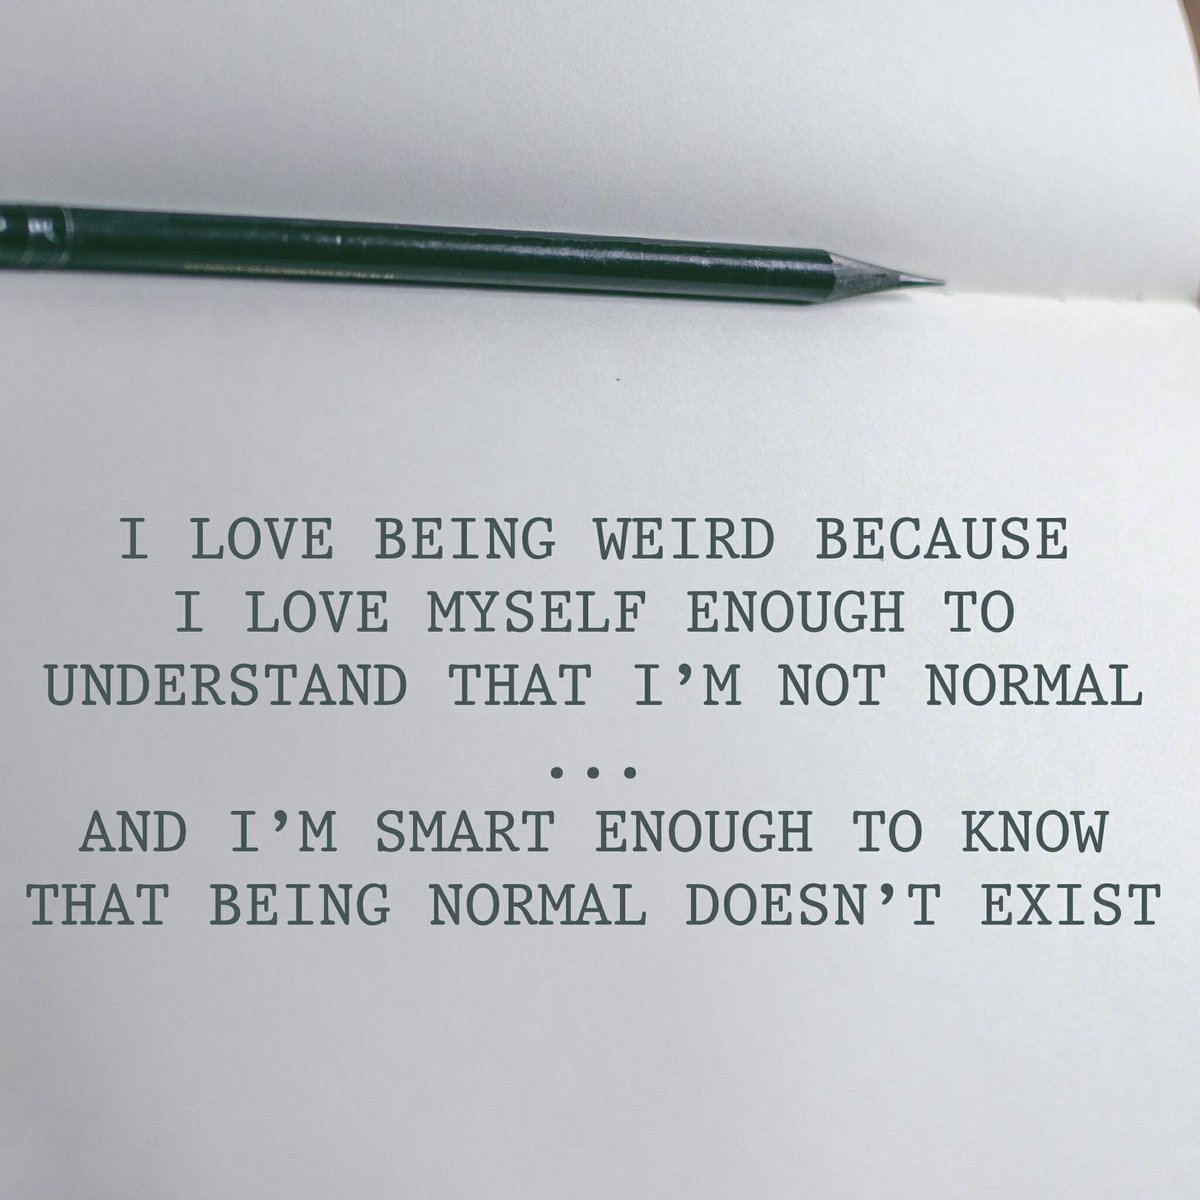 Are you normal? #poetry #love #quotes #poem #writer #poet #art #poems #lovequotes #sad #writing #words #life #quotes #quoteoftheday #famousquotes #poetryislove #wordporn #igpoetry #writersofig #spilledink #artist #wordsonpaper #inspirationalquotes #cutequotes #poets